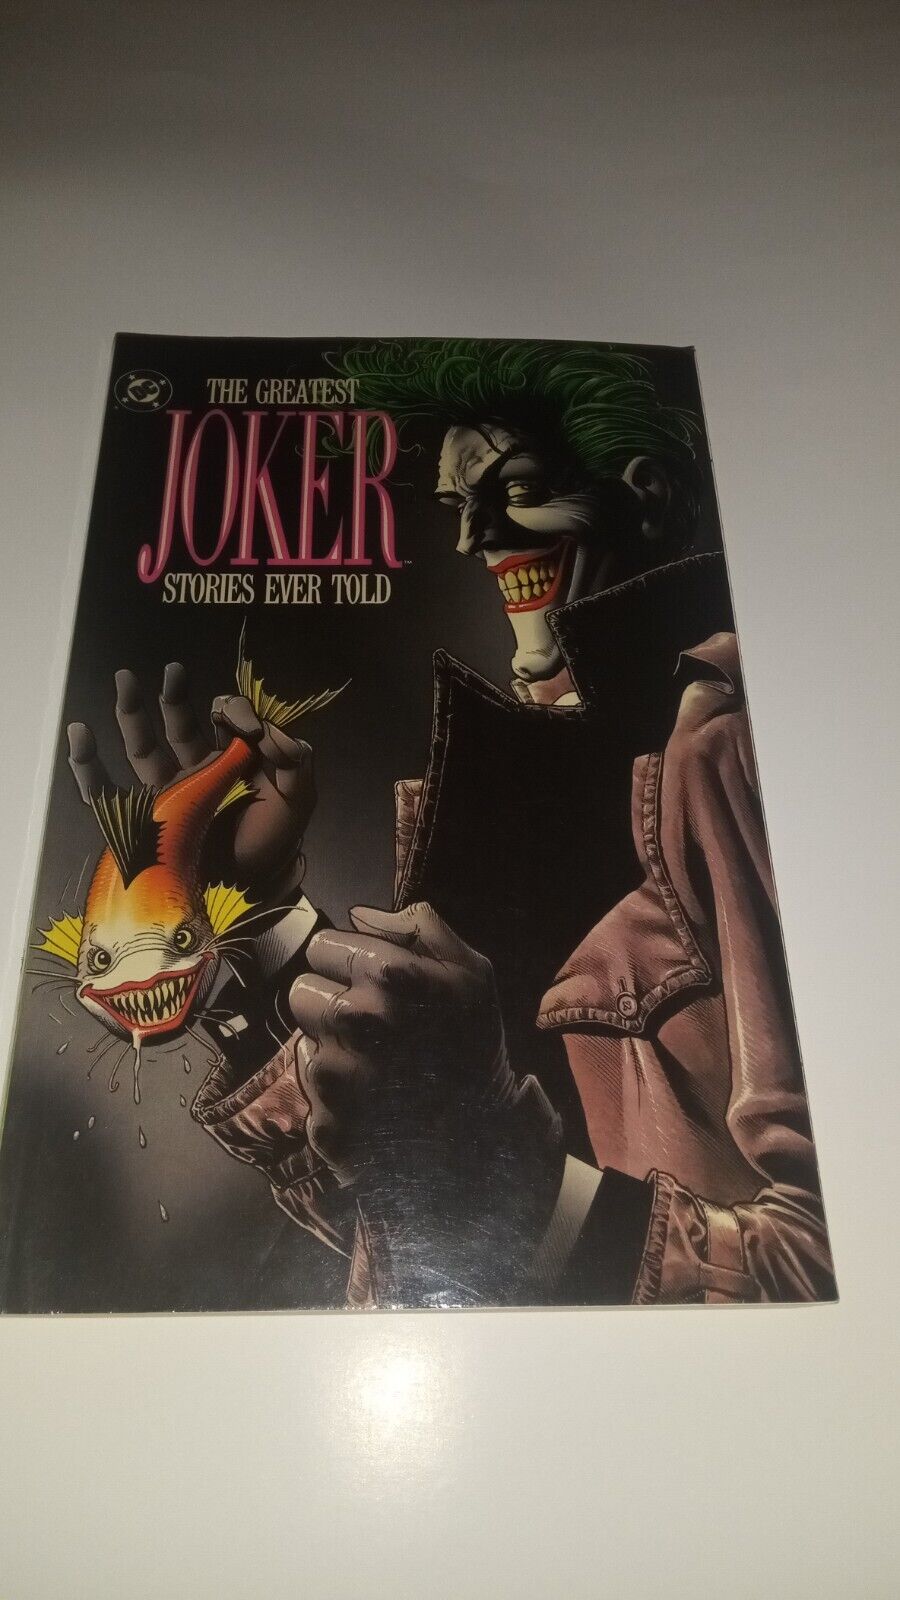 The Greatest Joker Stories Ever Told (DC Comics August 1989)